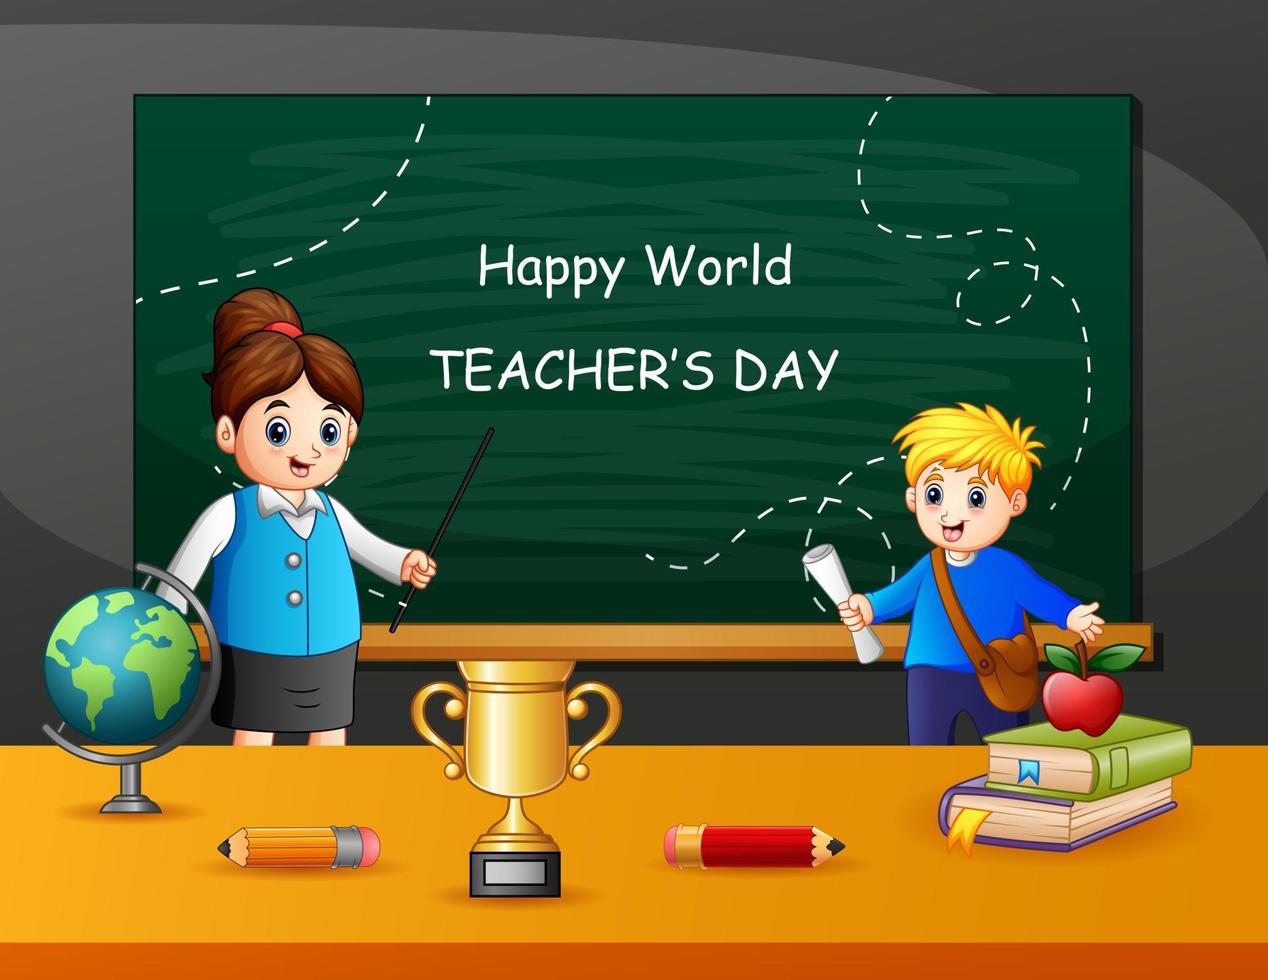 Happy Teacher's Day text on chalkboard with kids and teacher vector